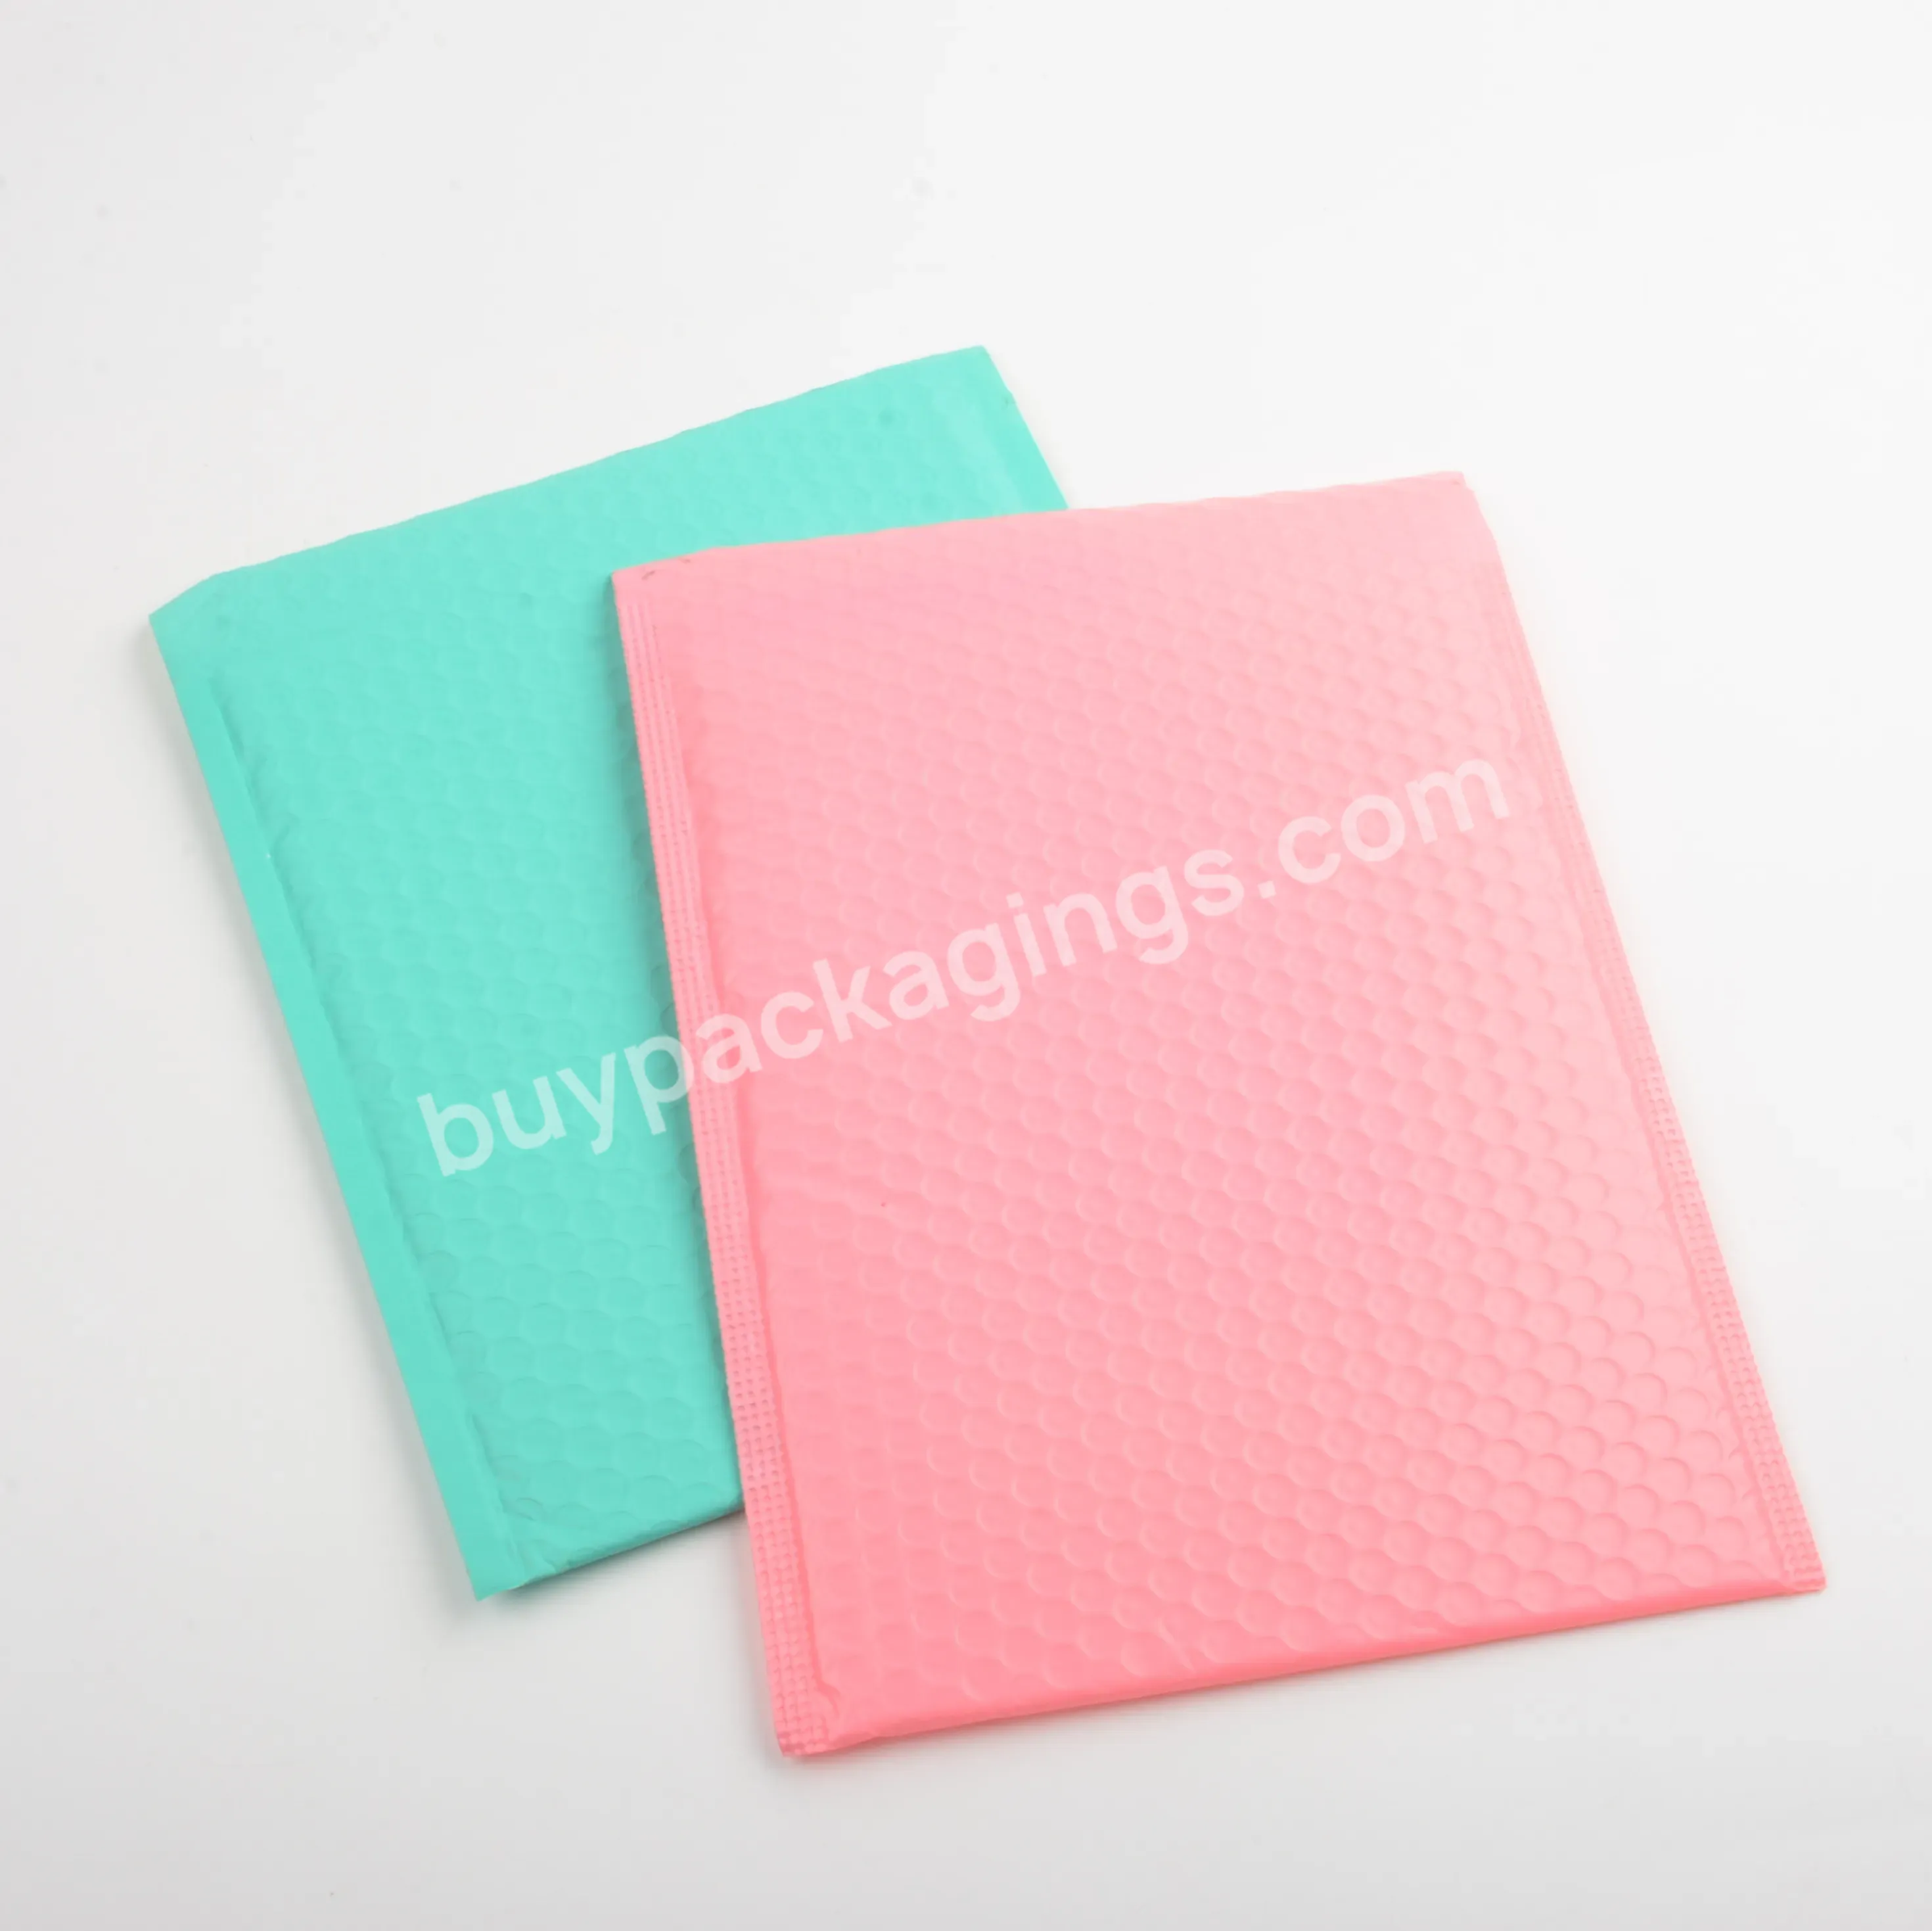 Wholesale Custom Bubble Bags For Packaging Printed Bubble Bags With Logo - Buy Custom Bubble Bags,Printed Bubble Bags With Logo,High Quality Bubble Bags.